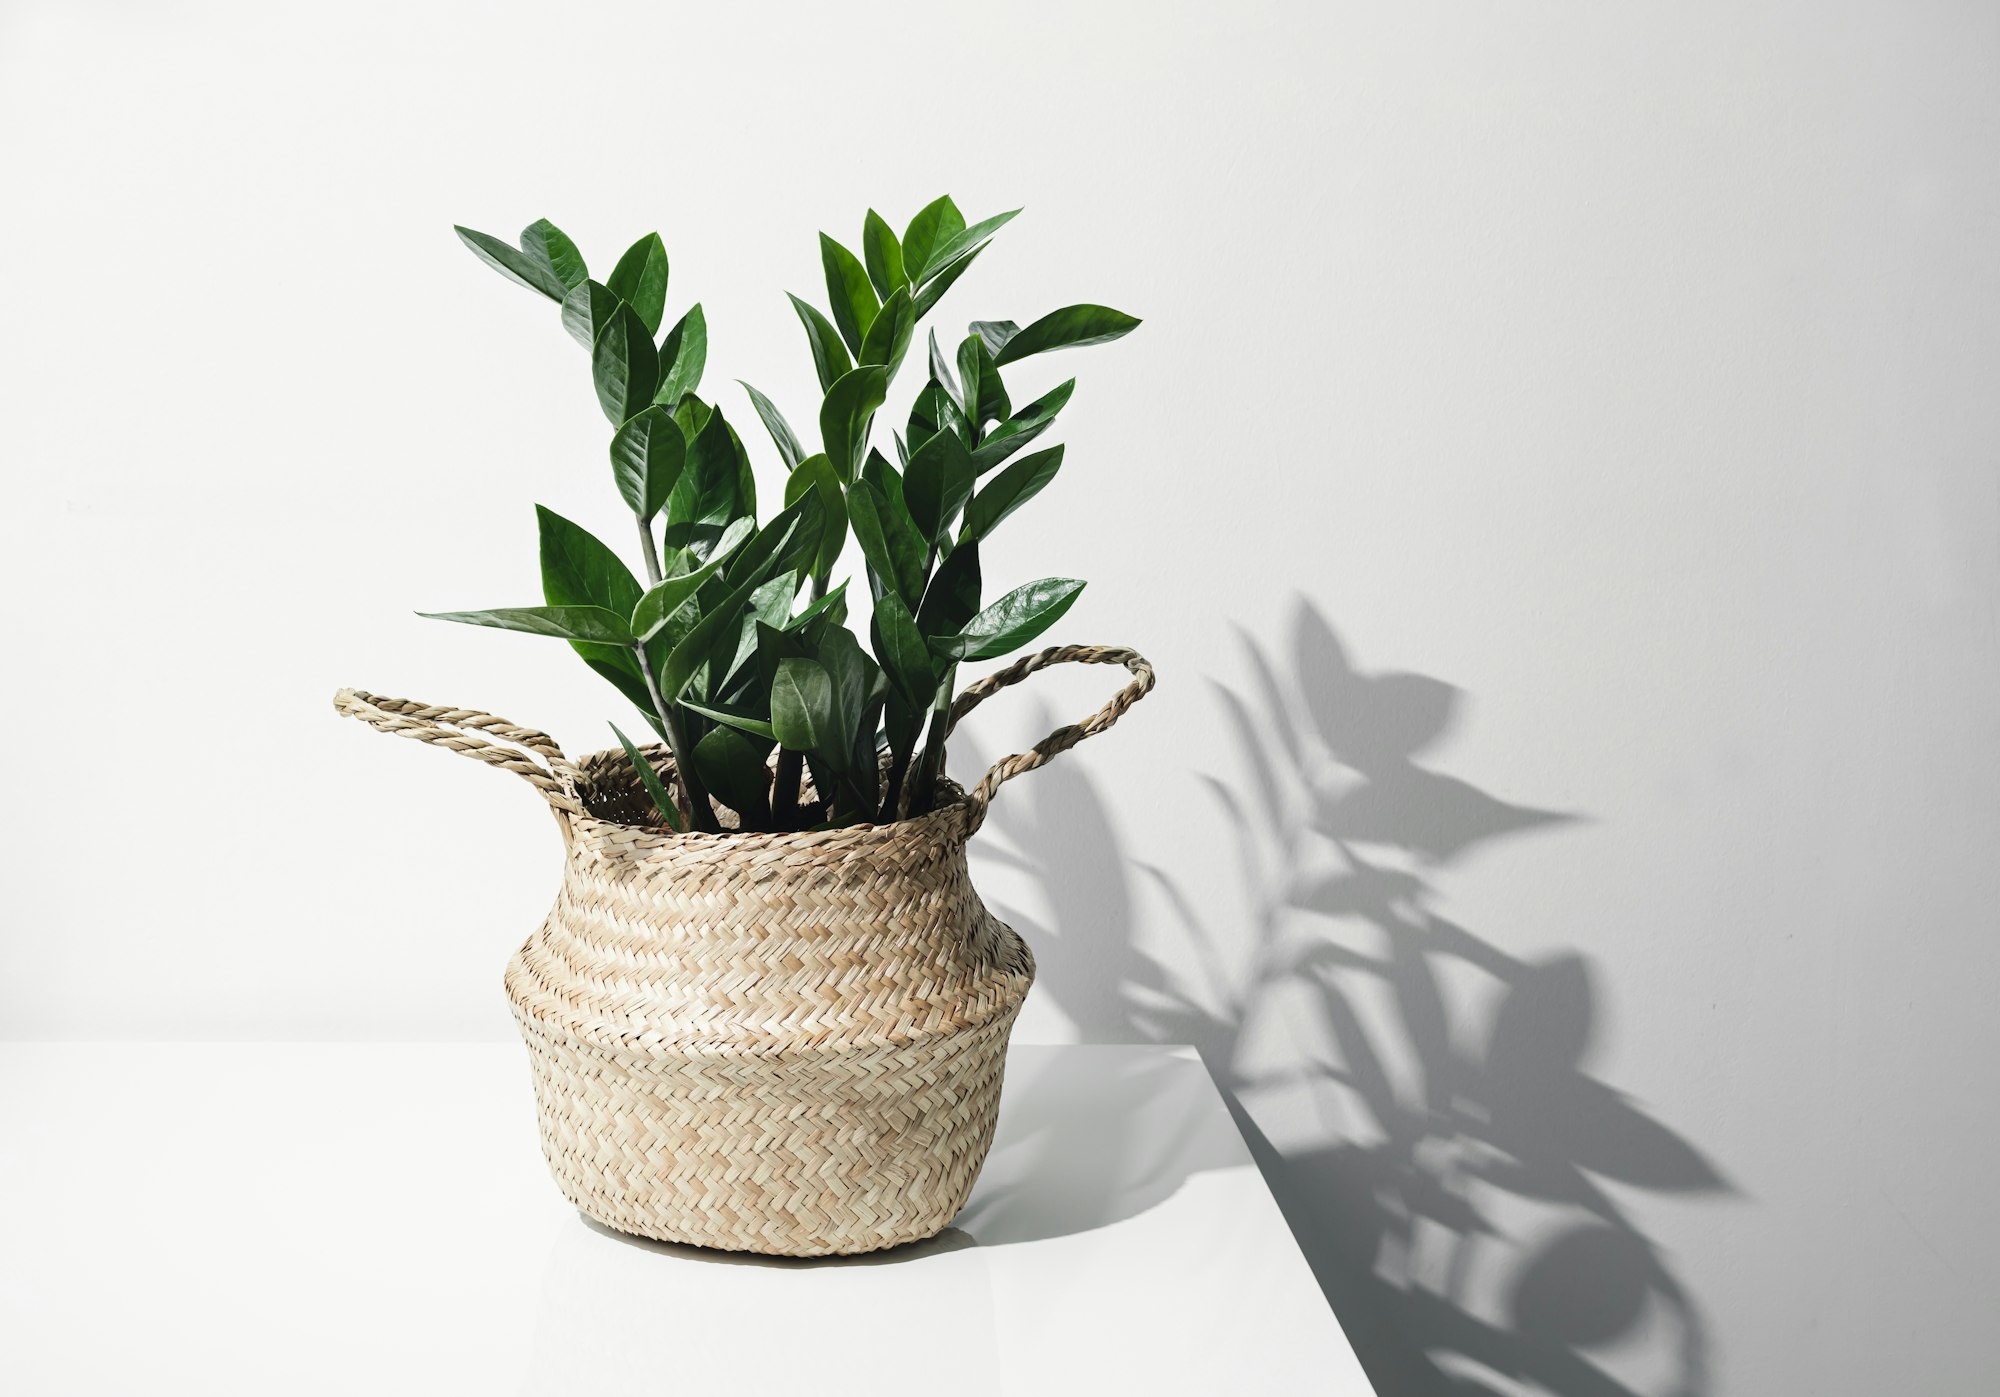 Zamioculcas and its shadow